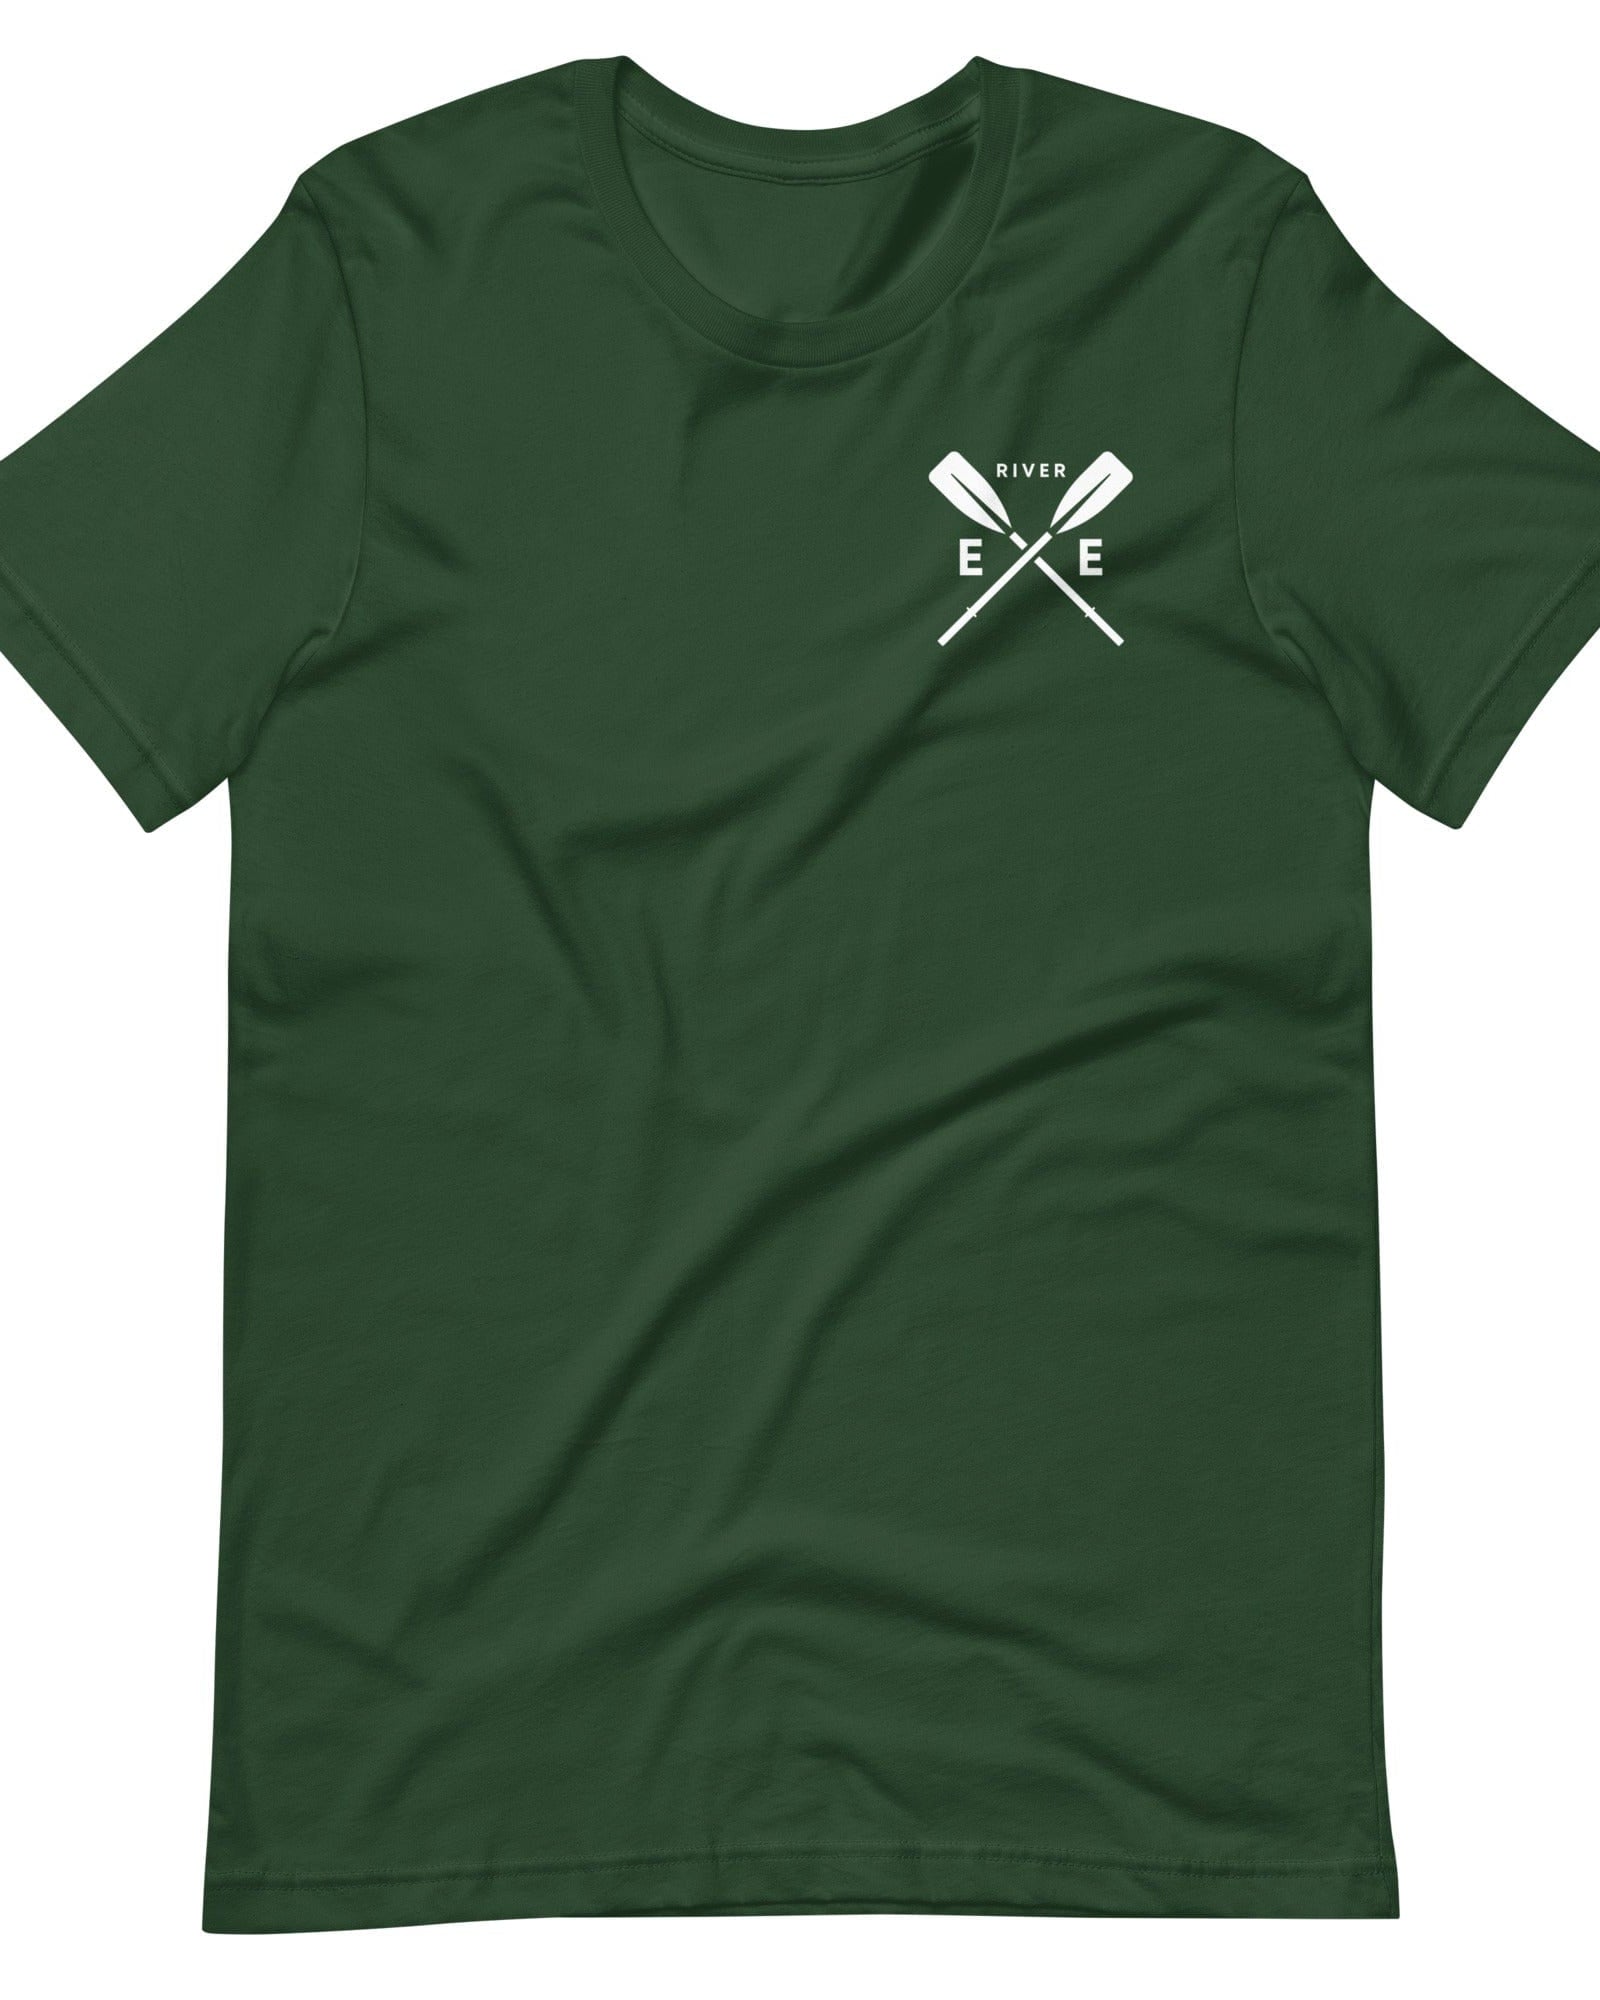 River Exe T-shirt | Exeter Gift Shop Forest / S Shirts & Tops Jolly & Goode